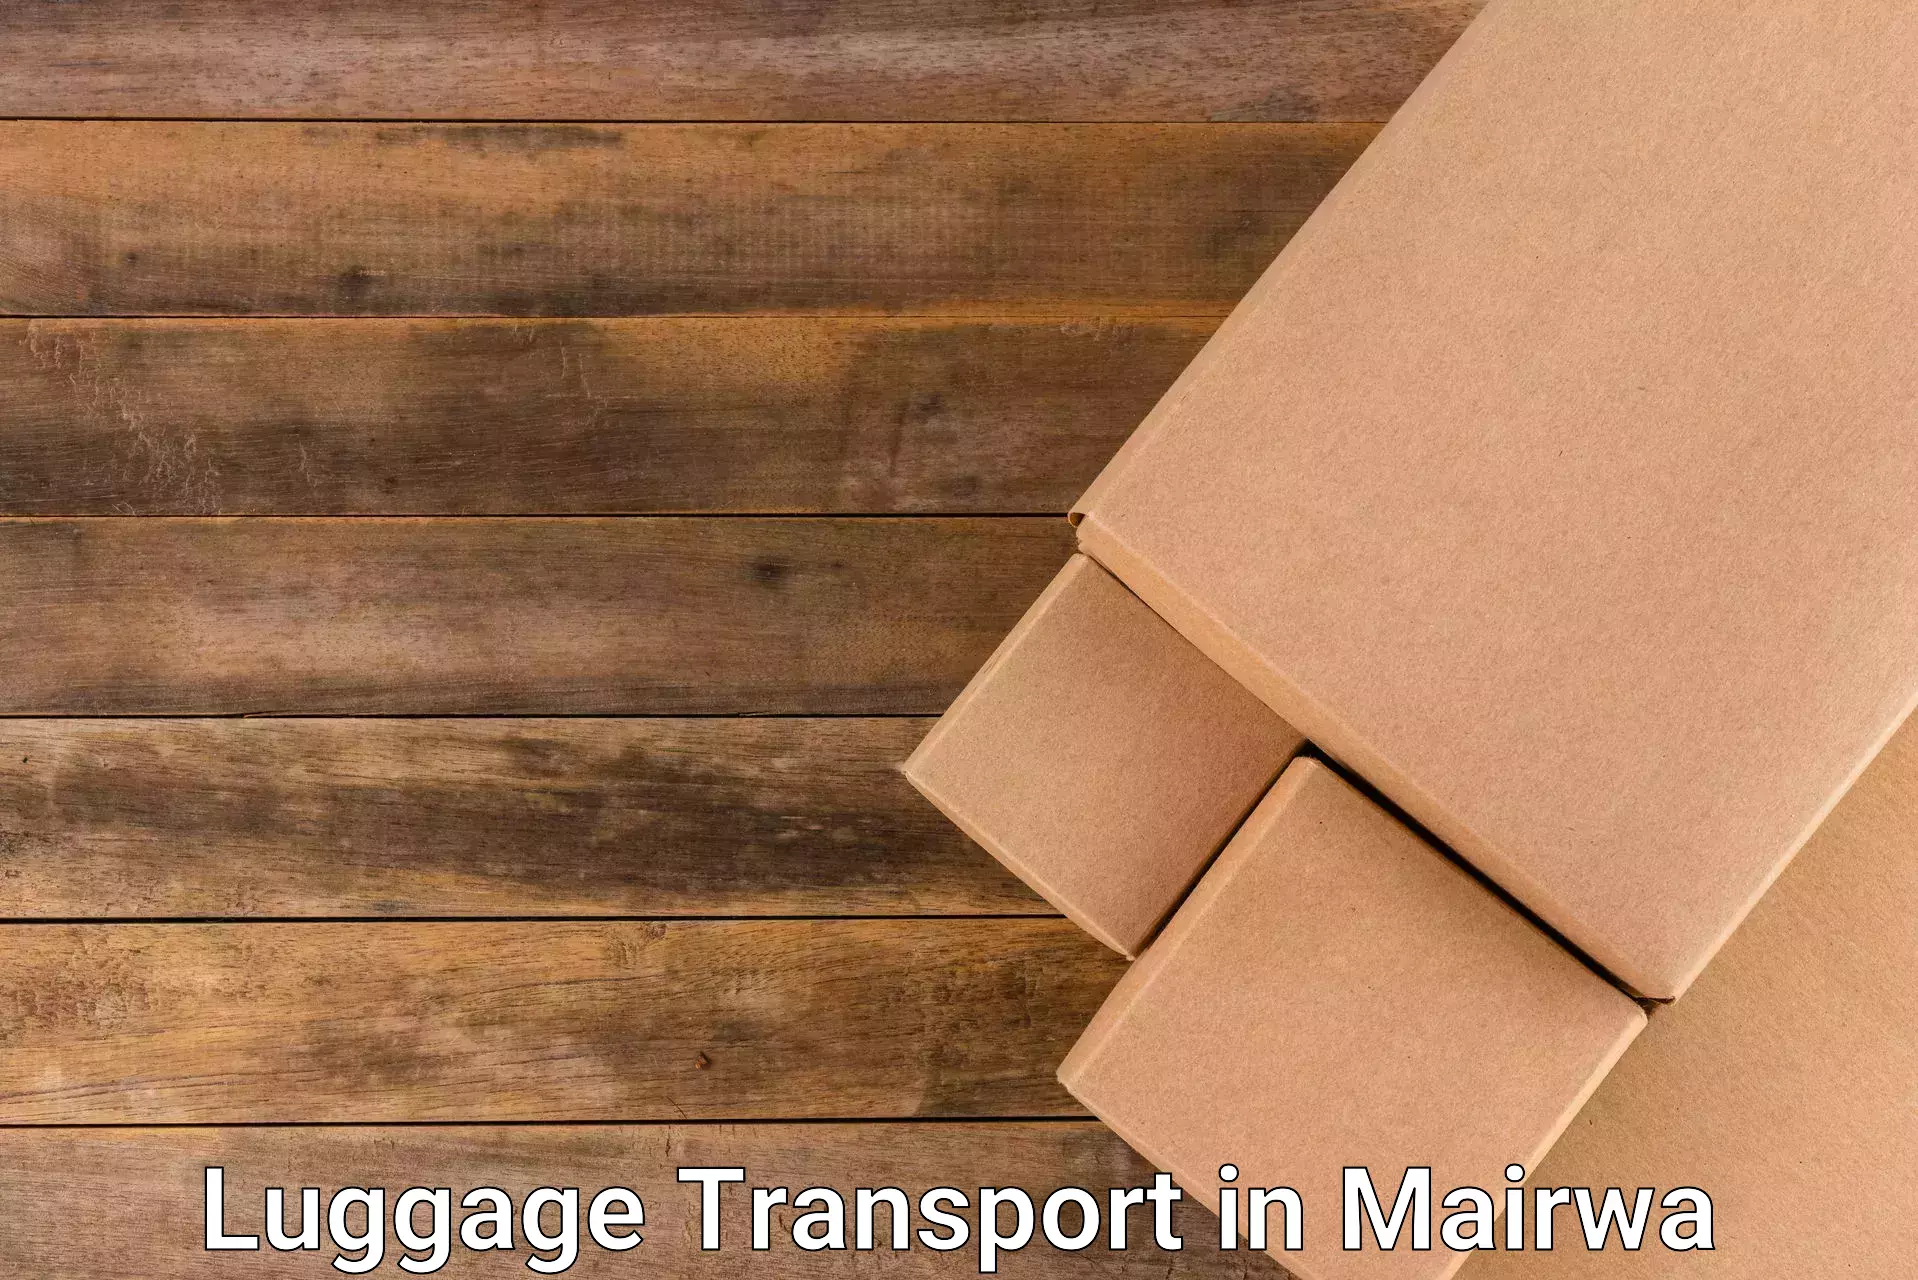 Baggage delivery management in Mairwa